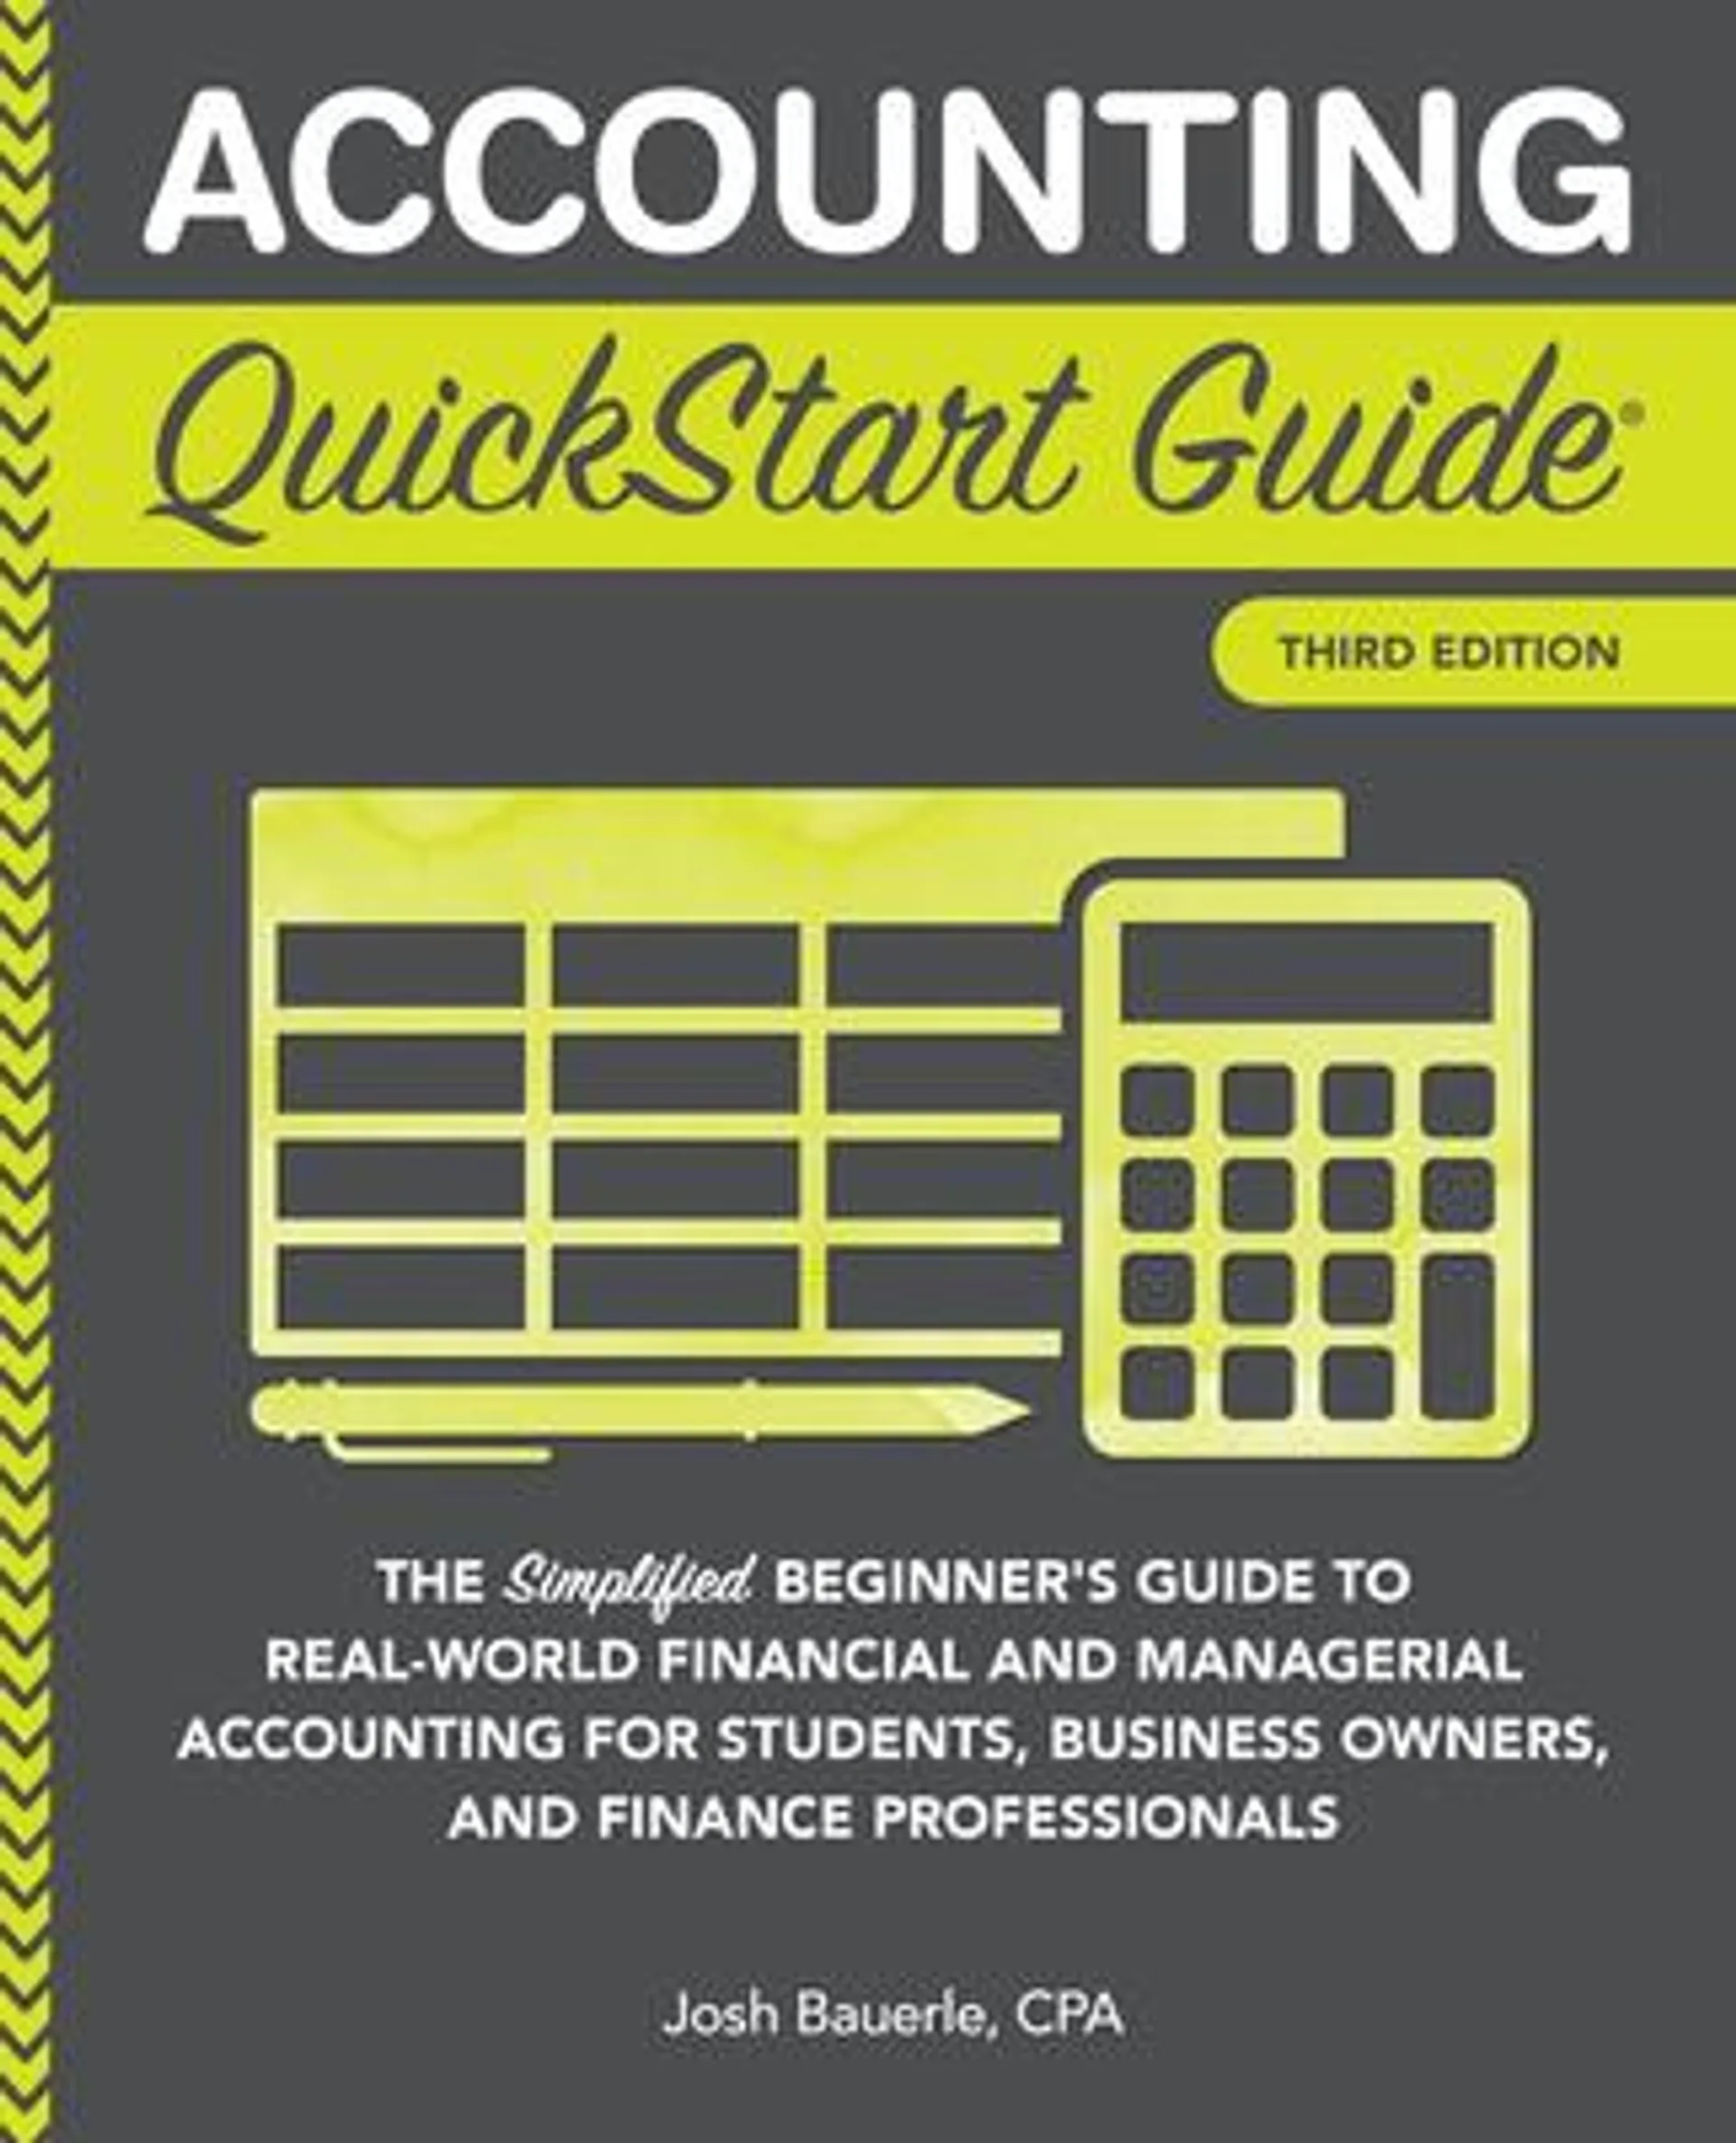 Accounting QuickStart Guide: The Simplified Beginner's Guide to Financial & Managerial Accounting For Students, Business Owners and Finance Professionals (3rd edition)